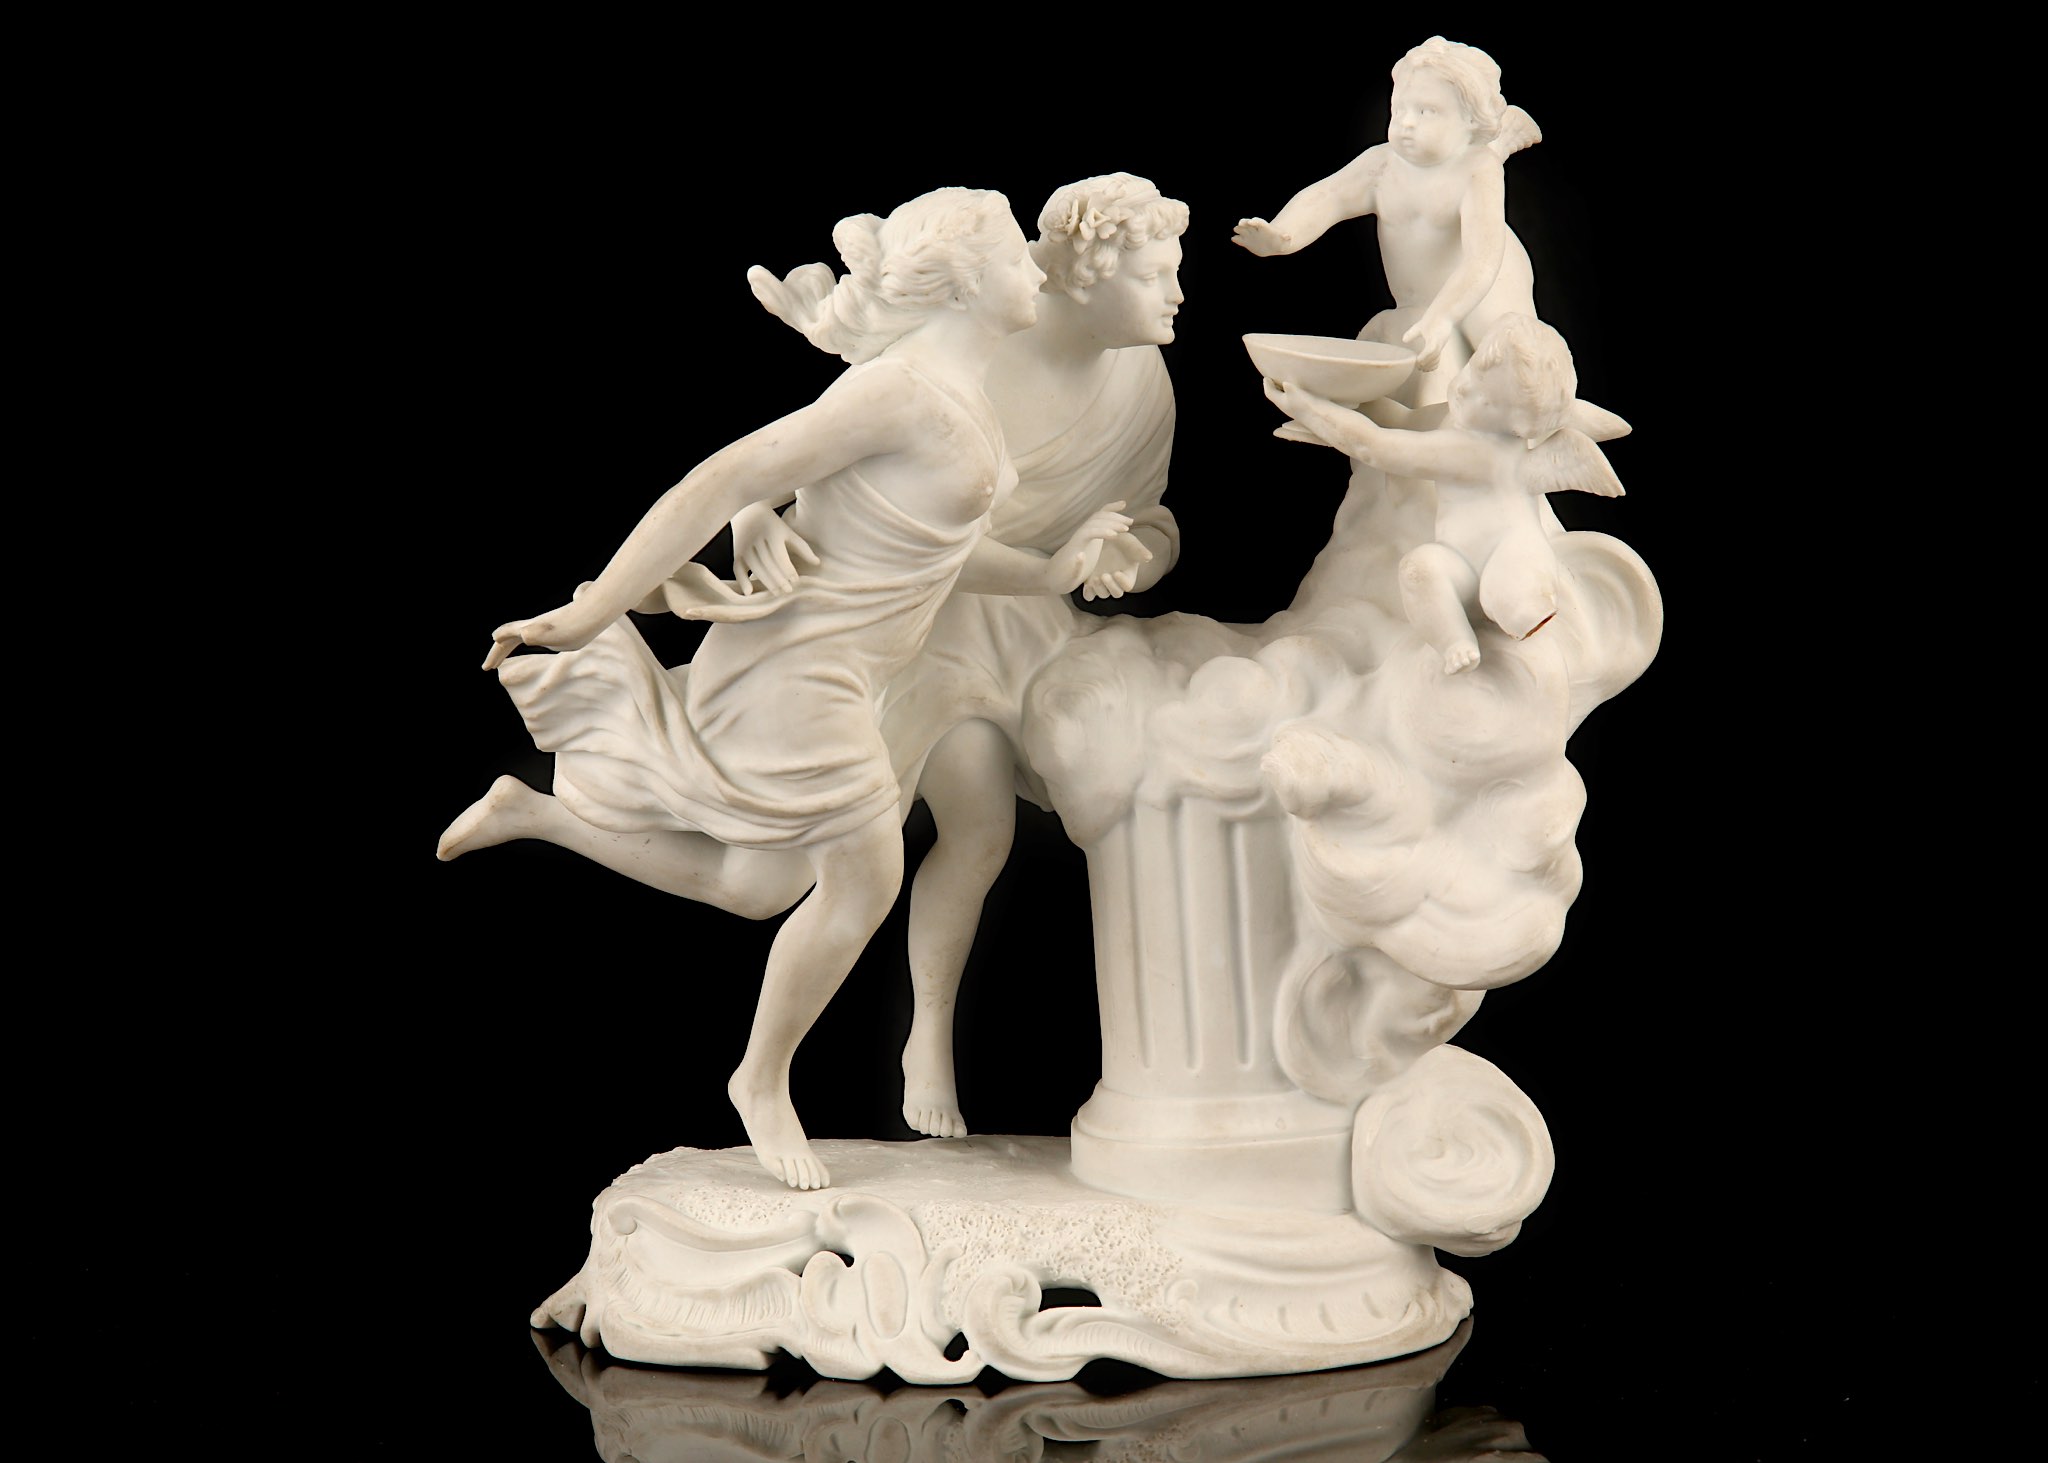 A SEVRES STYLE BISQUE PORCELAIN FIGURE GROUP OF 'THE FOUNTAIN OF LOVE', 19th century, after Jean-